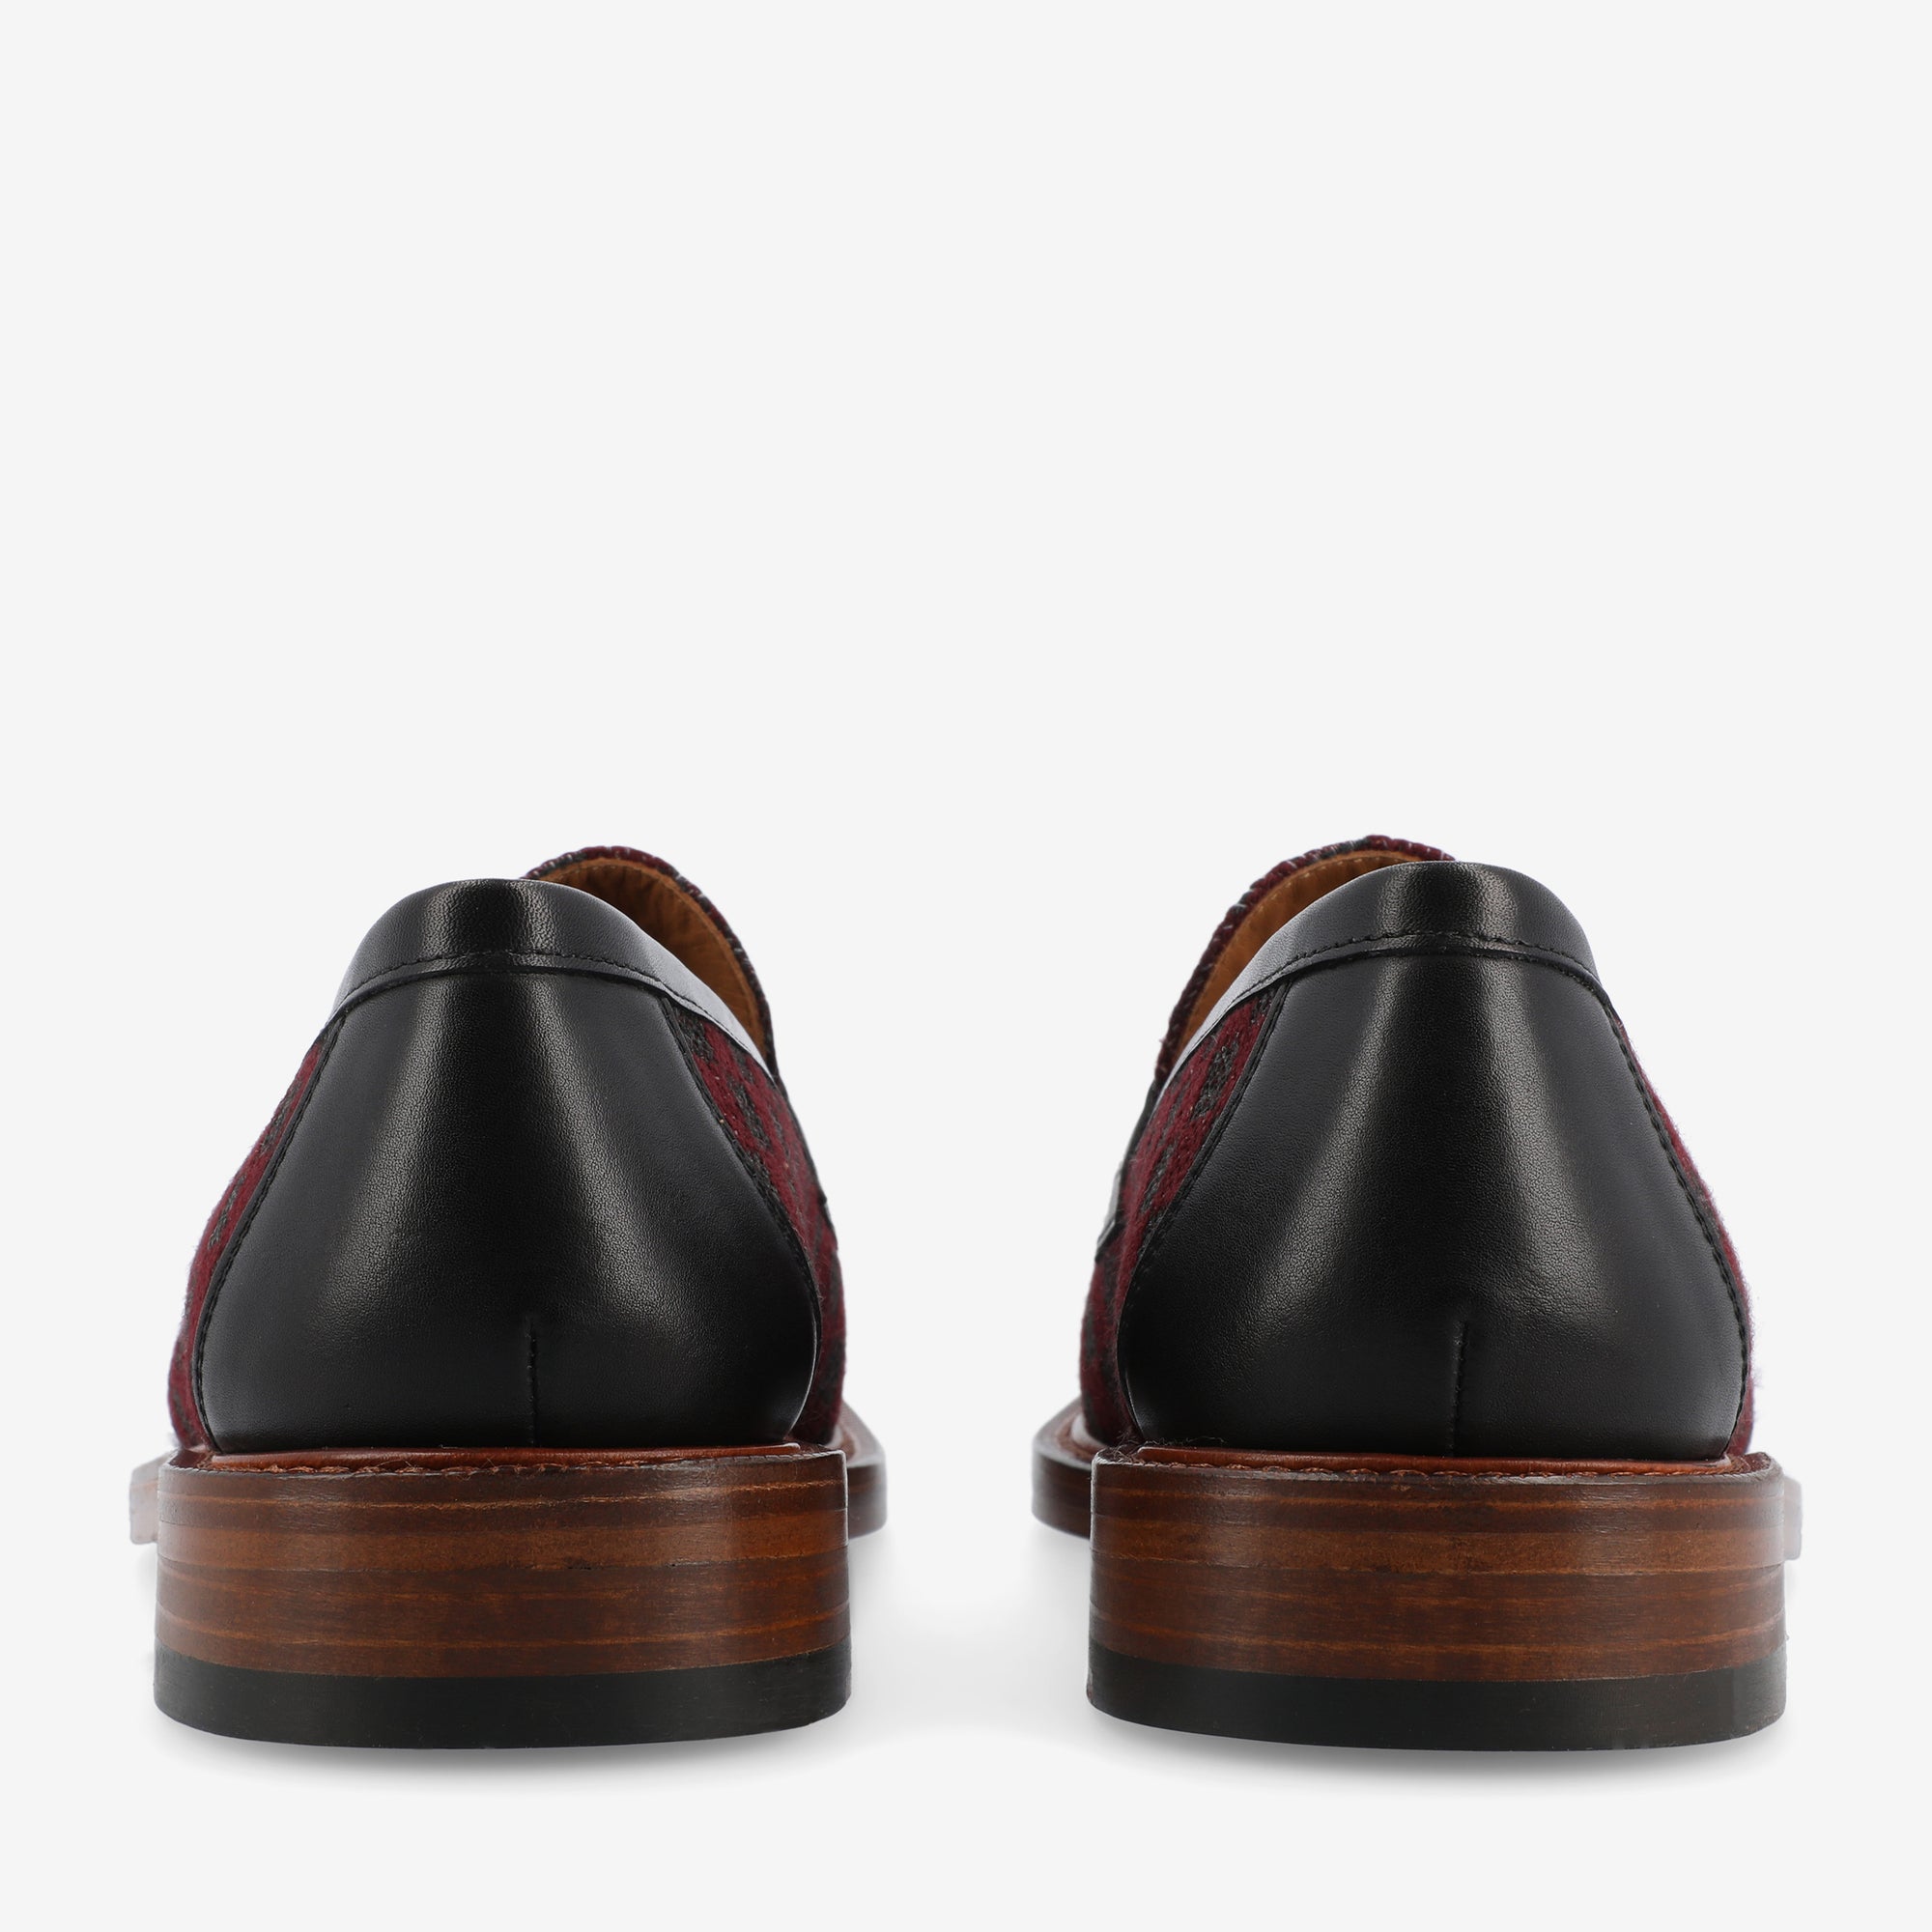 The Fitz Loafer in Maroon Check